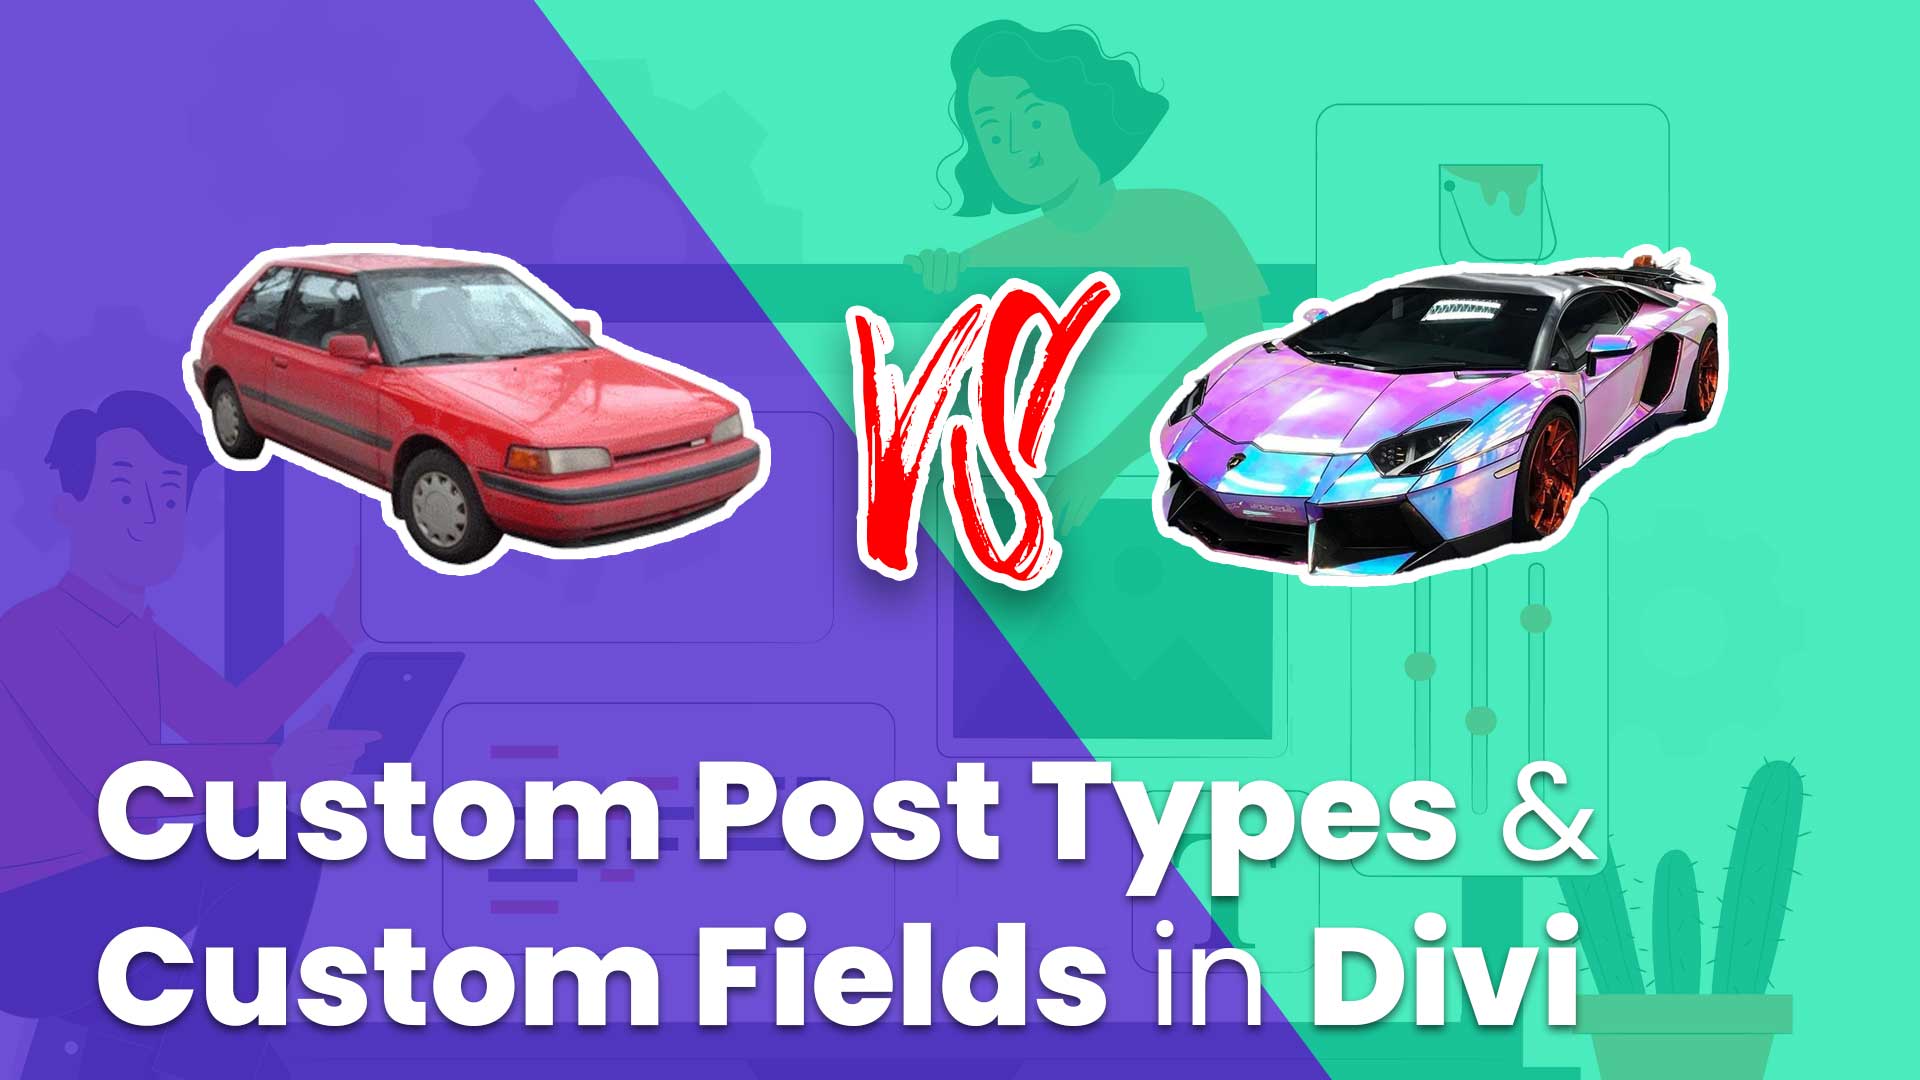 WordPress Custom Post Types and Advanced Custom Fields. What are they? And Why You Should Care!